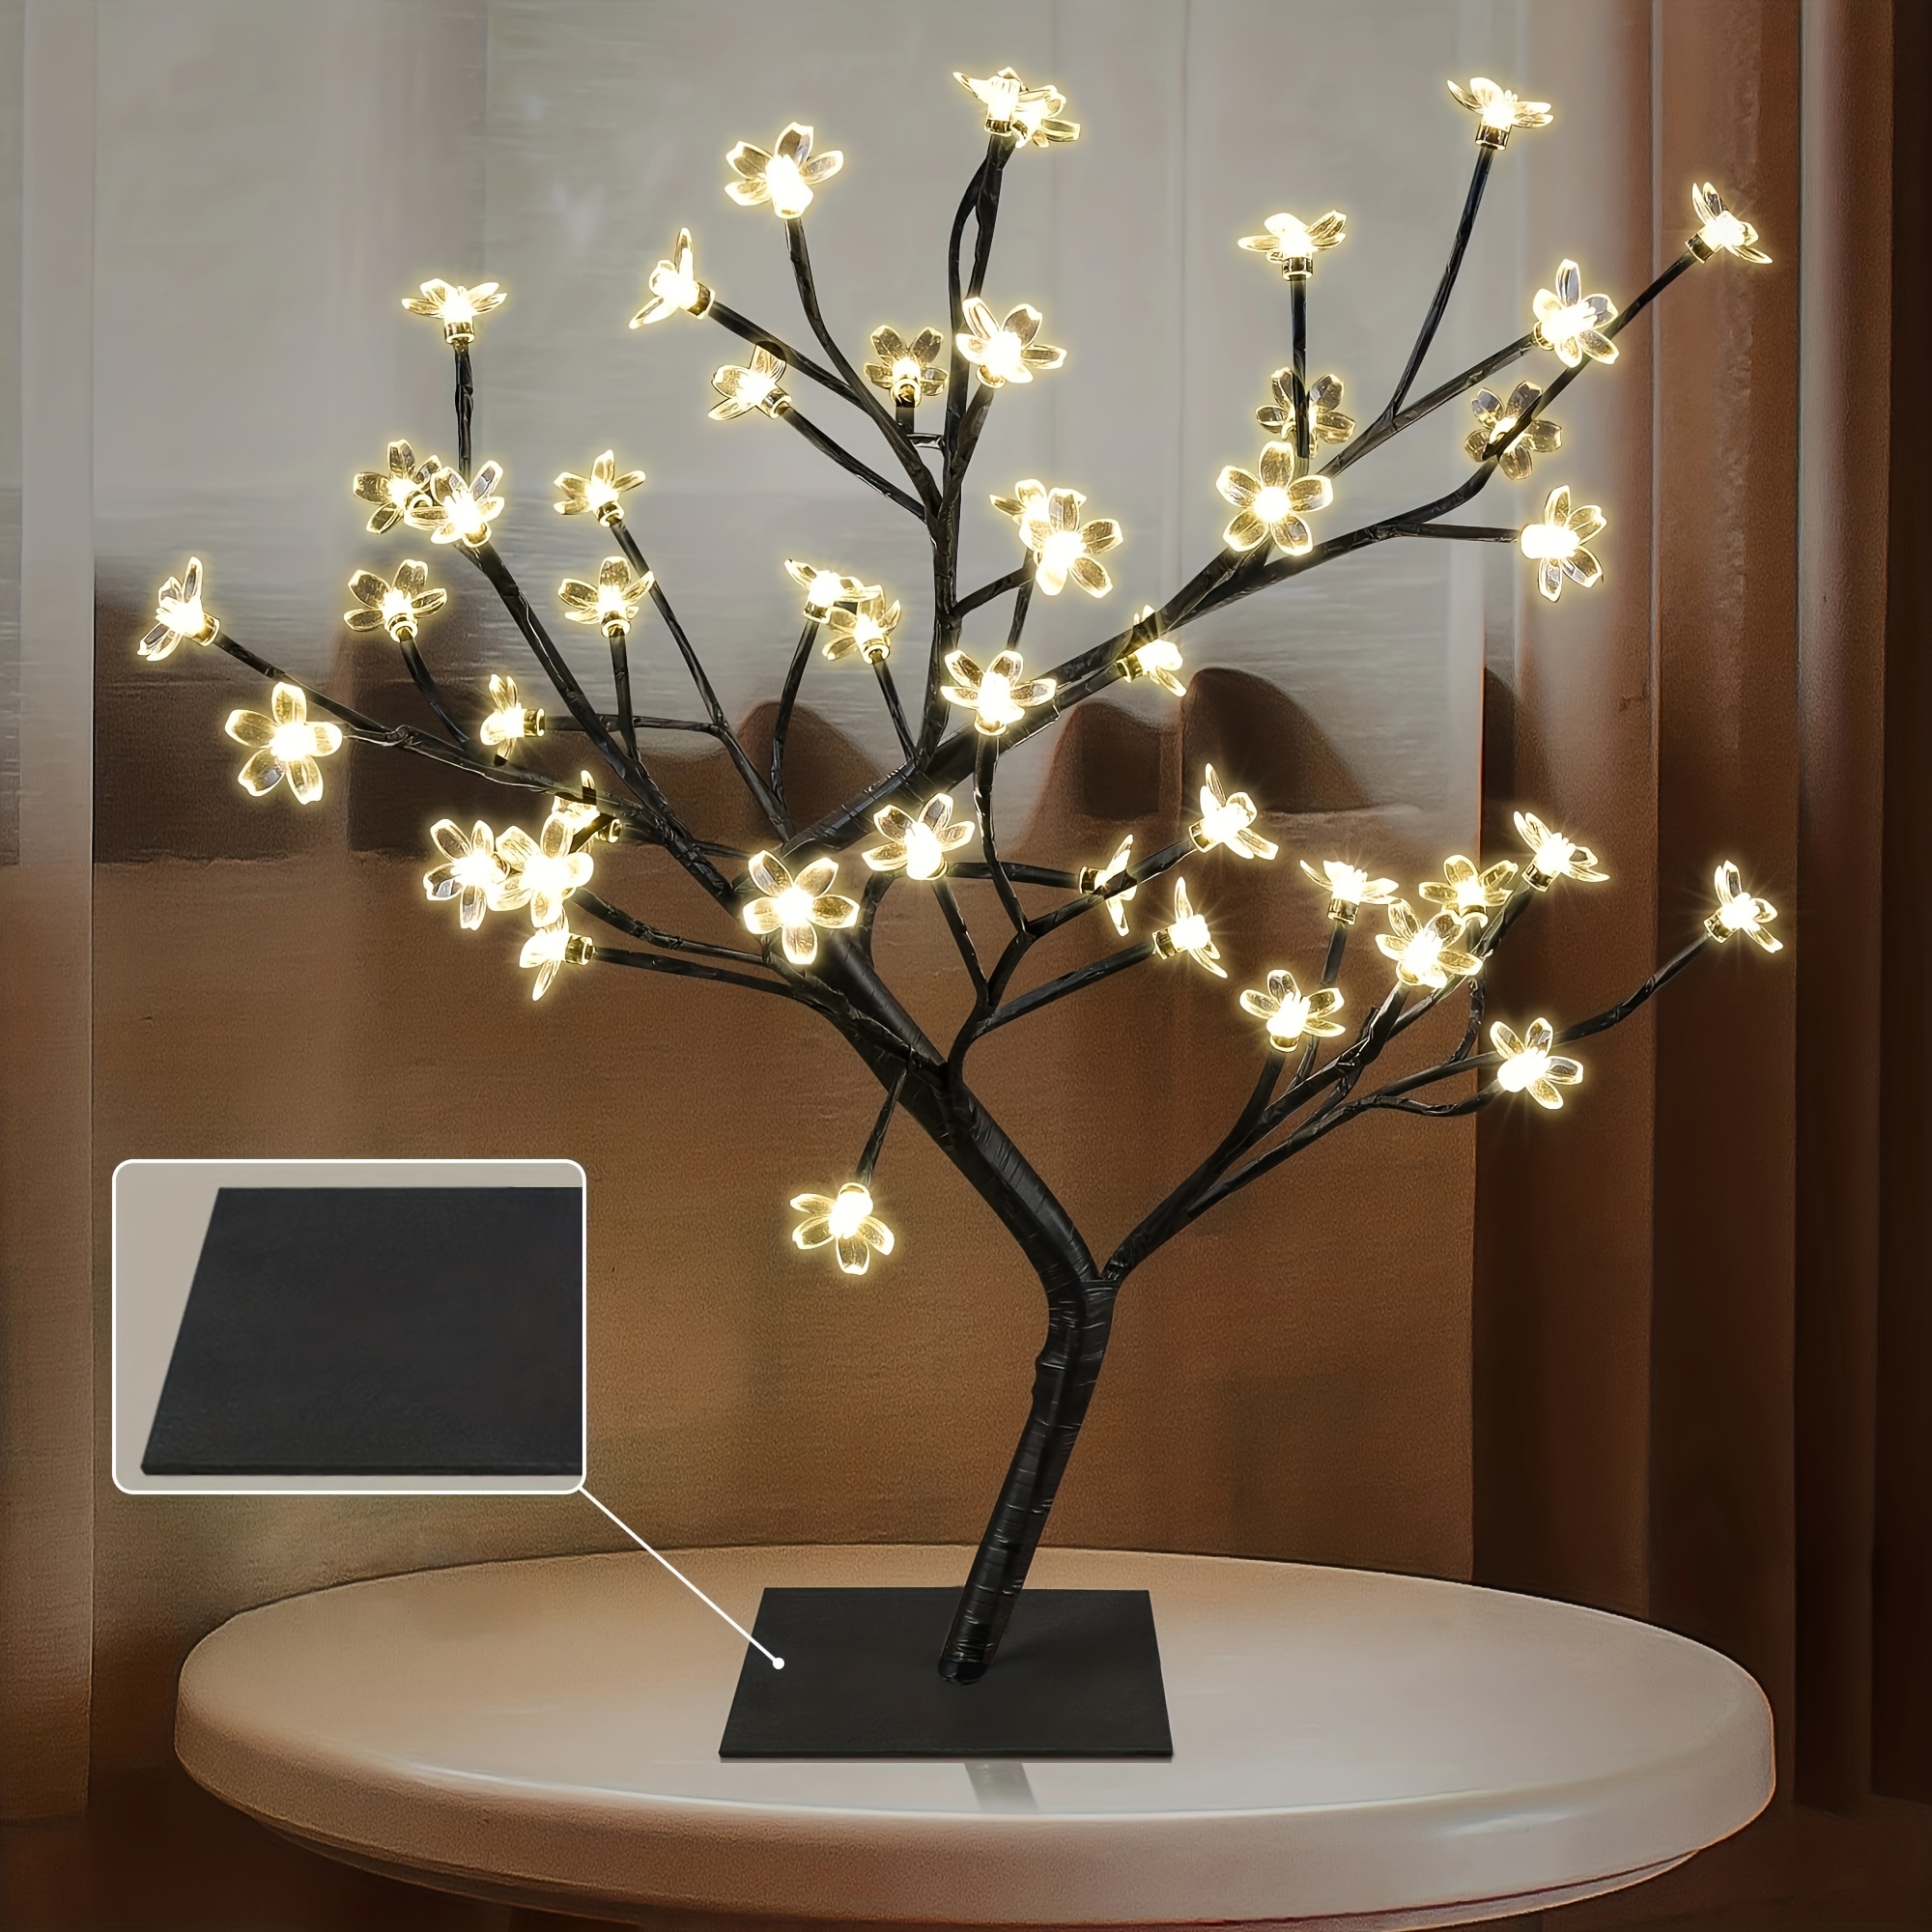 Bonsai Tree Light Artificial Tree Led Flower Cherry Blossom Light  Adjustable Branches Battery Operated for Room Decoration and Gift (Warm  White)